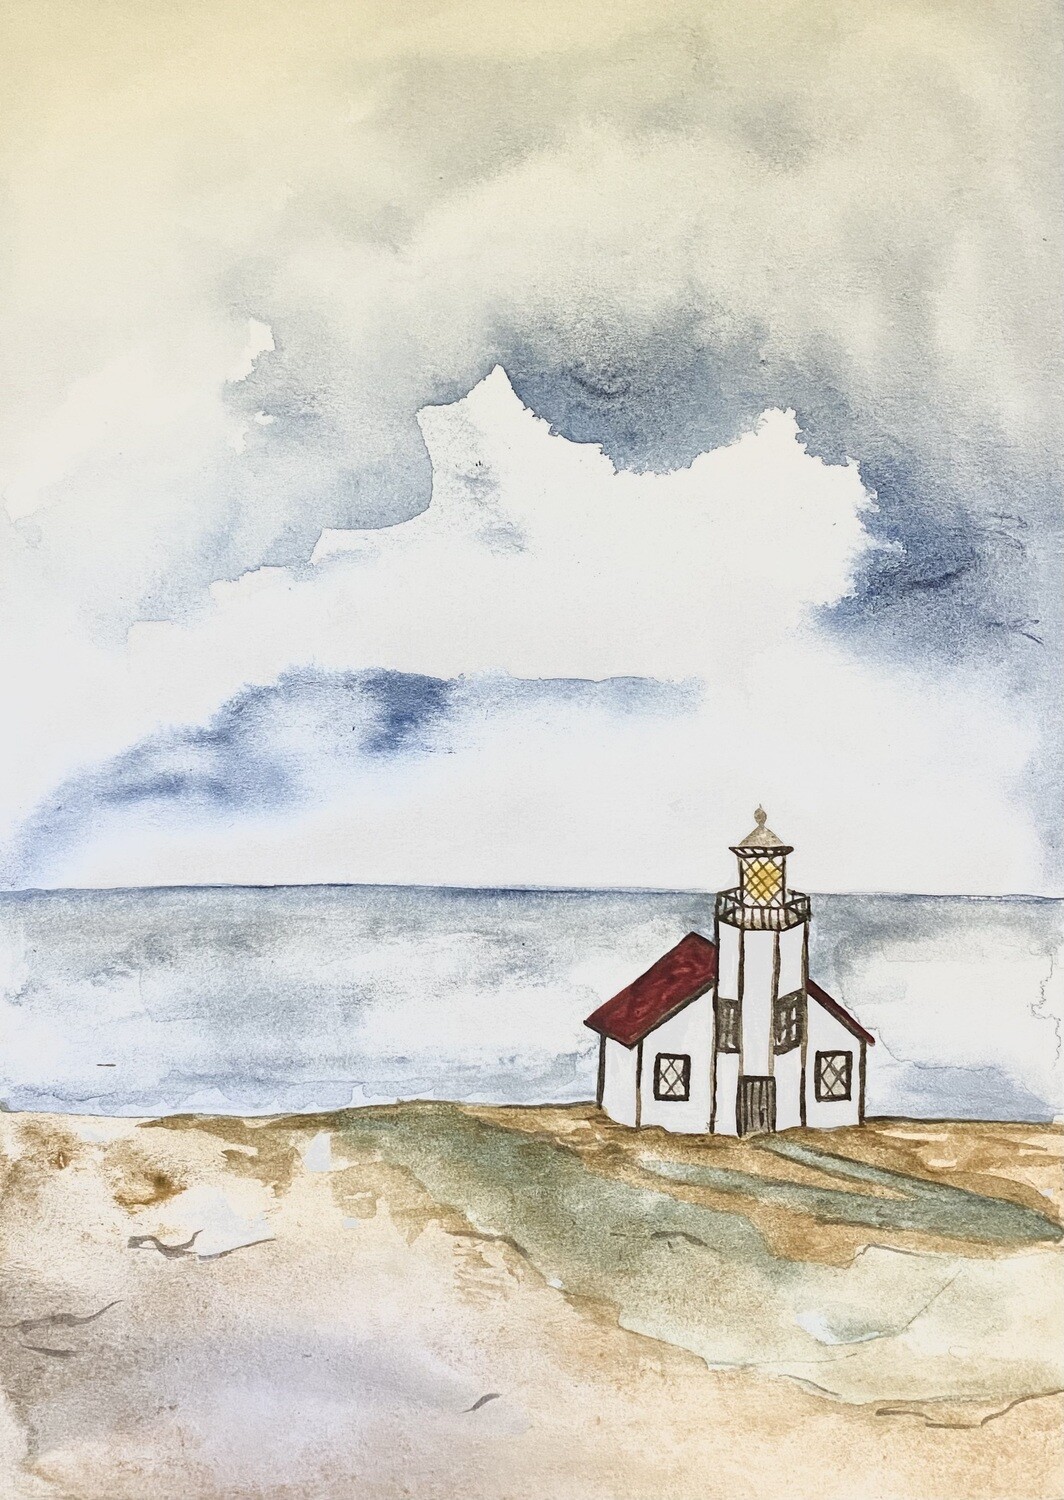 Bowman - Pt Cabrillo Lighthouse - Watercolor - Image 9x12 Frame 15x15